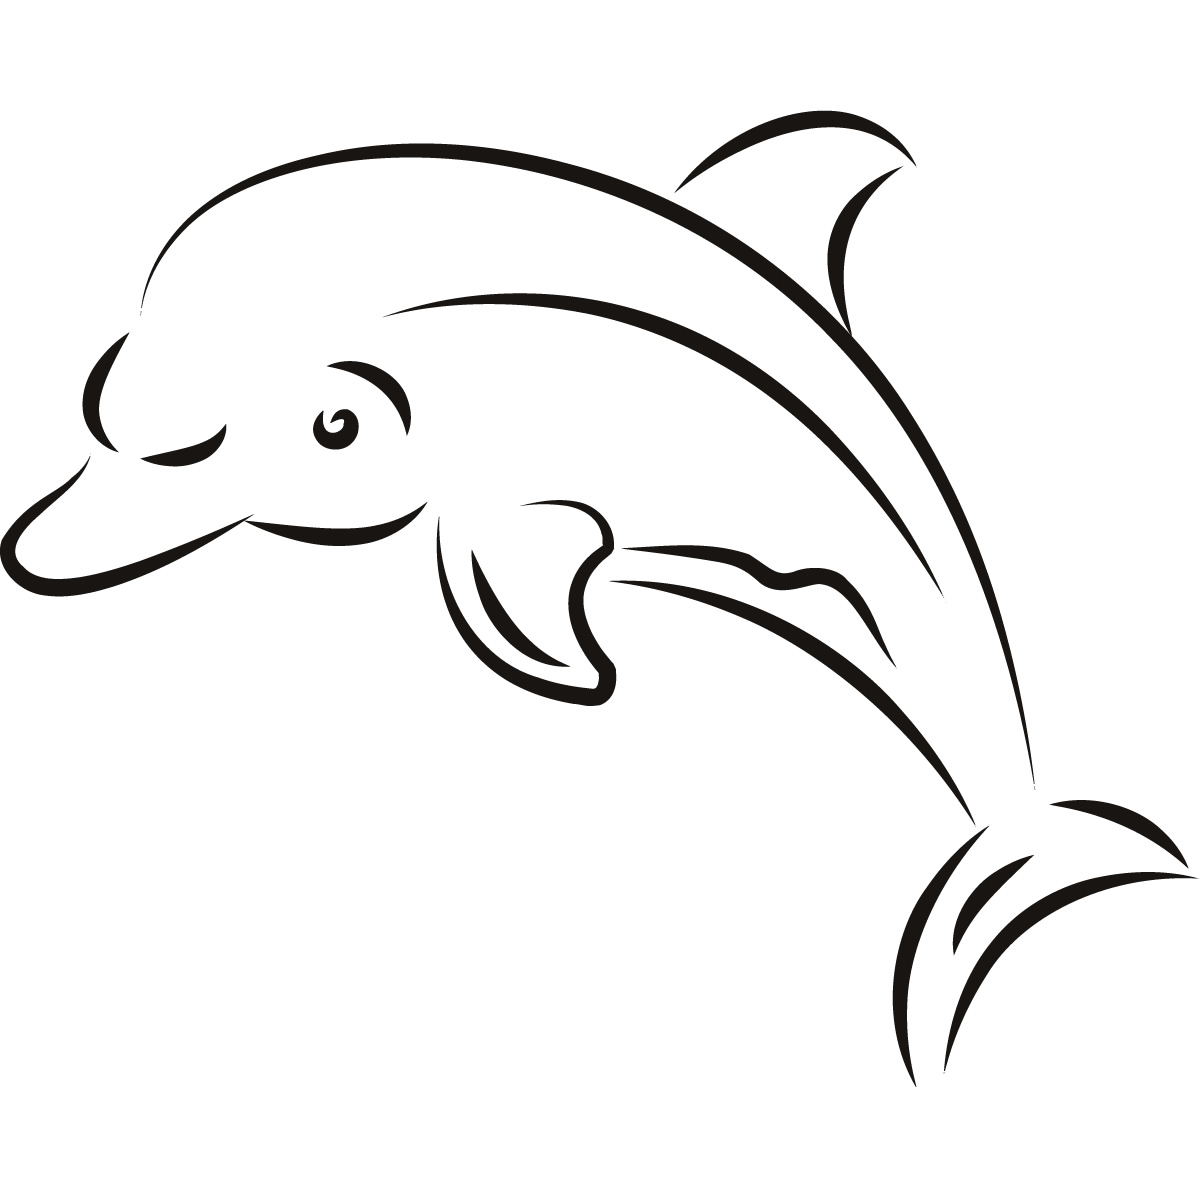 Dolphin Outline Wall Art Sticker Wall Decal